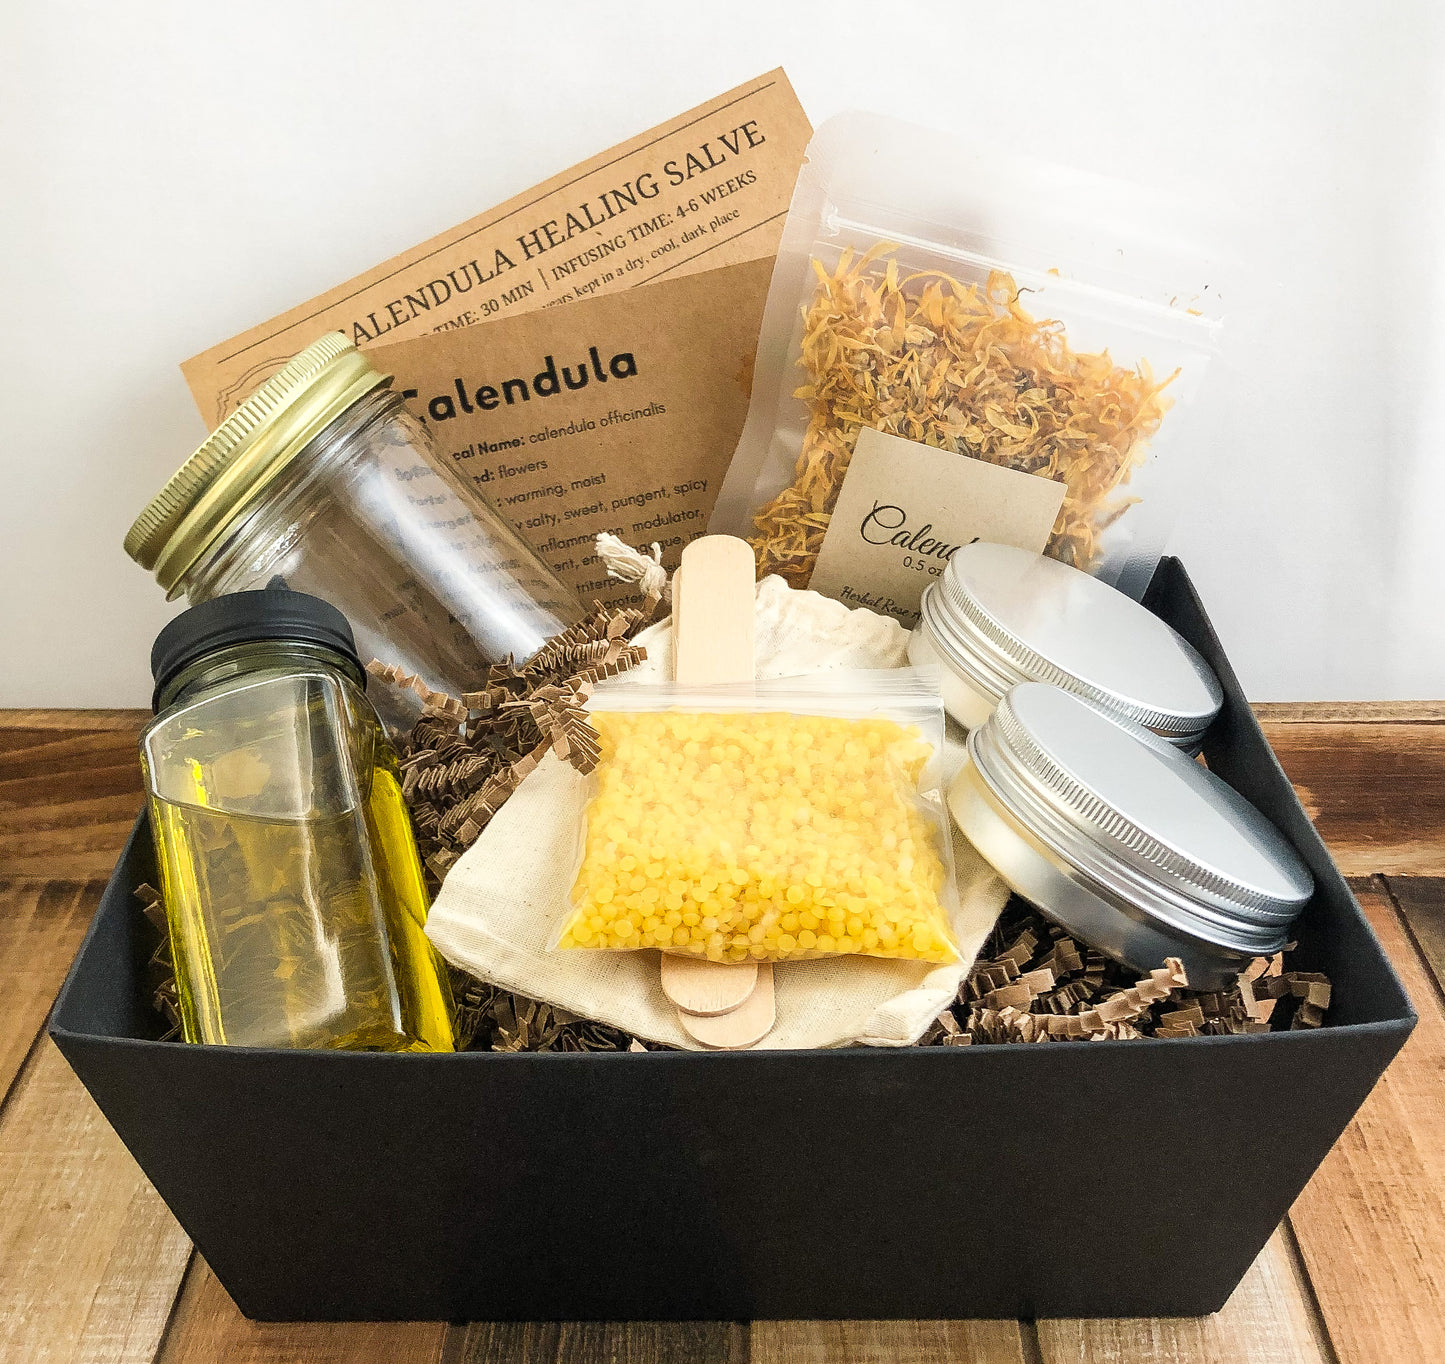 calendula salve kit in a black basket with with white background. Kit includes directions, monograph, 2 metal tins, dried calendula, mason jar, beeswax, wooden sticks, and muslin bag